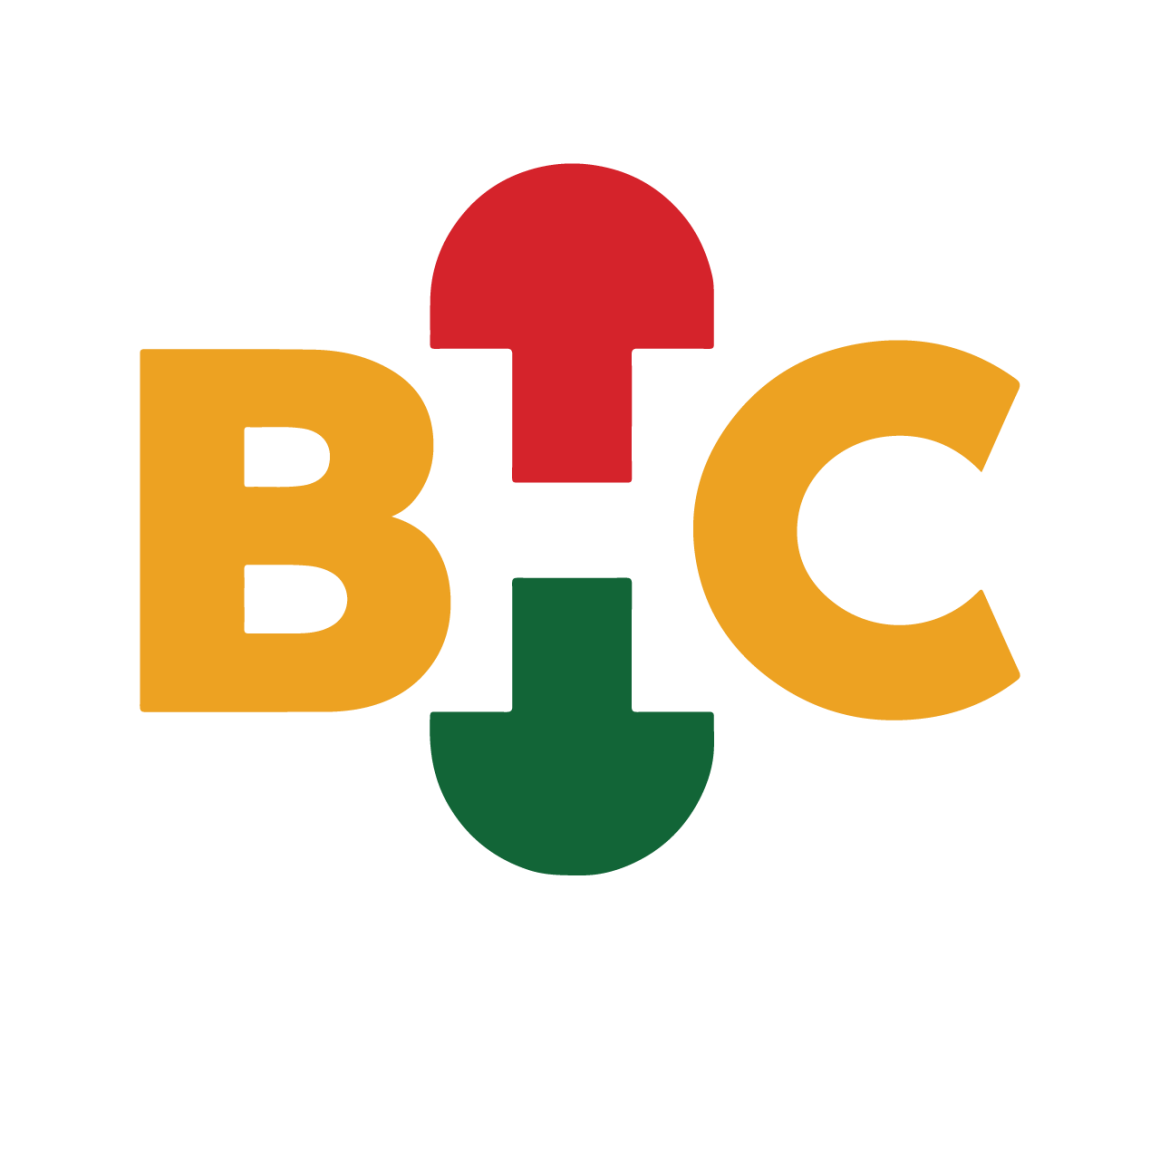 Logo of the Black Health Connect